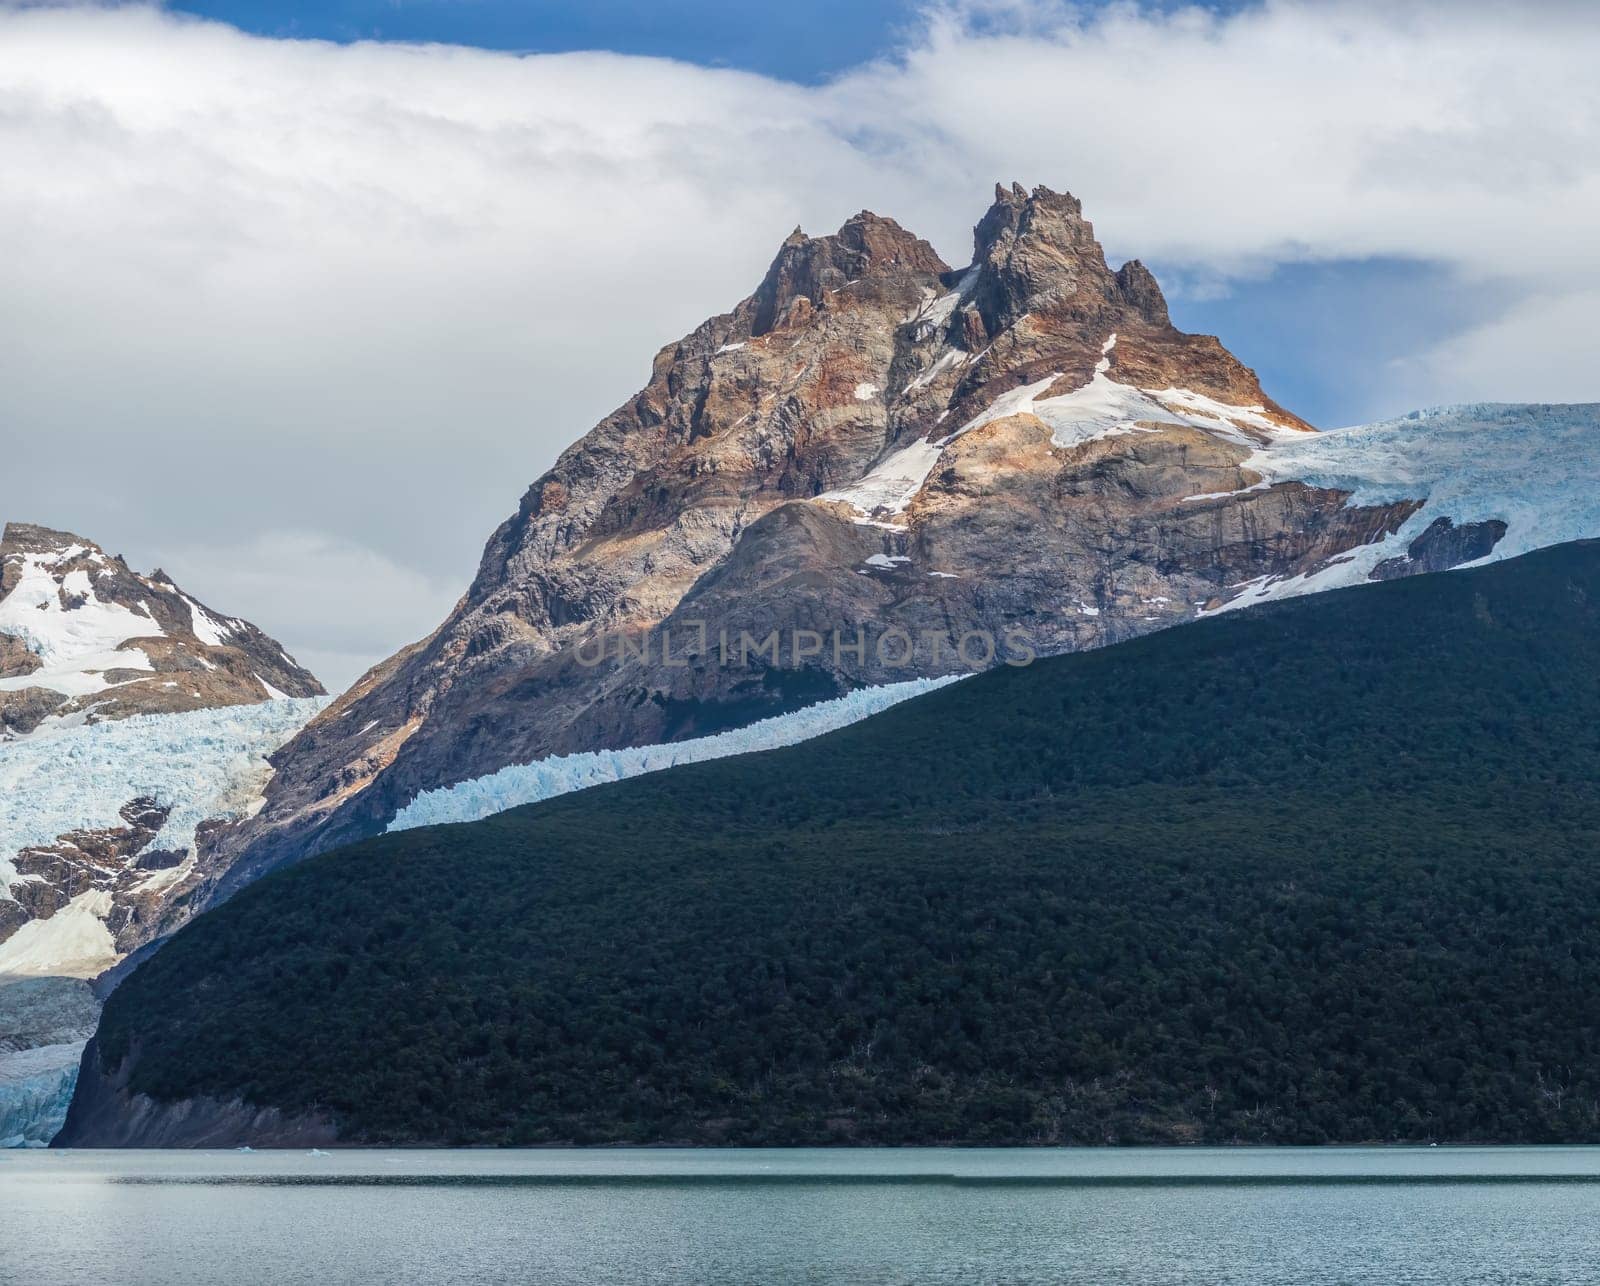 Majestic Glacial Landscape With Snow-Capped Mountain Peaks by FerradalFCG